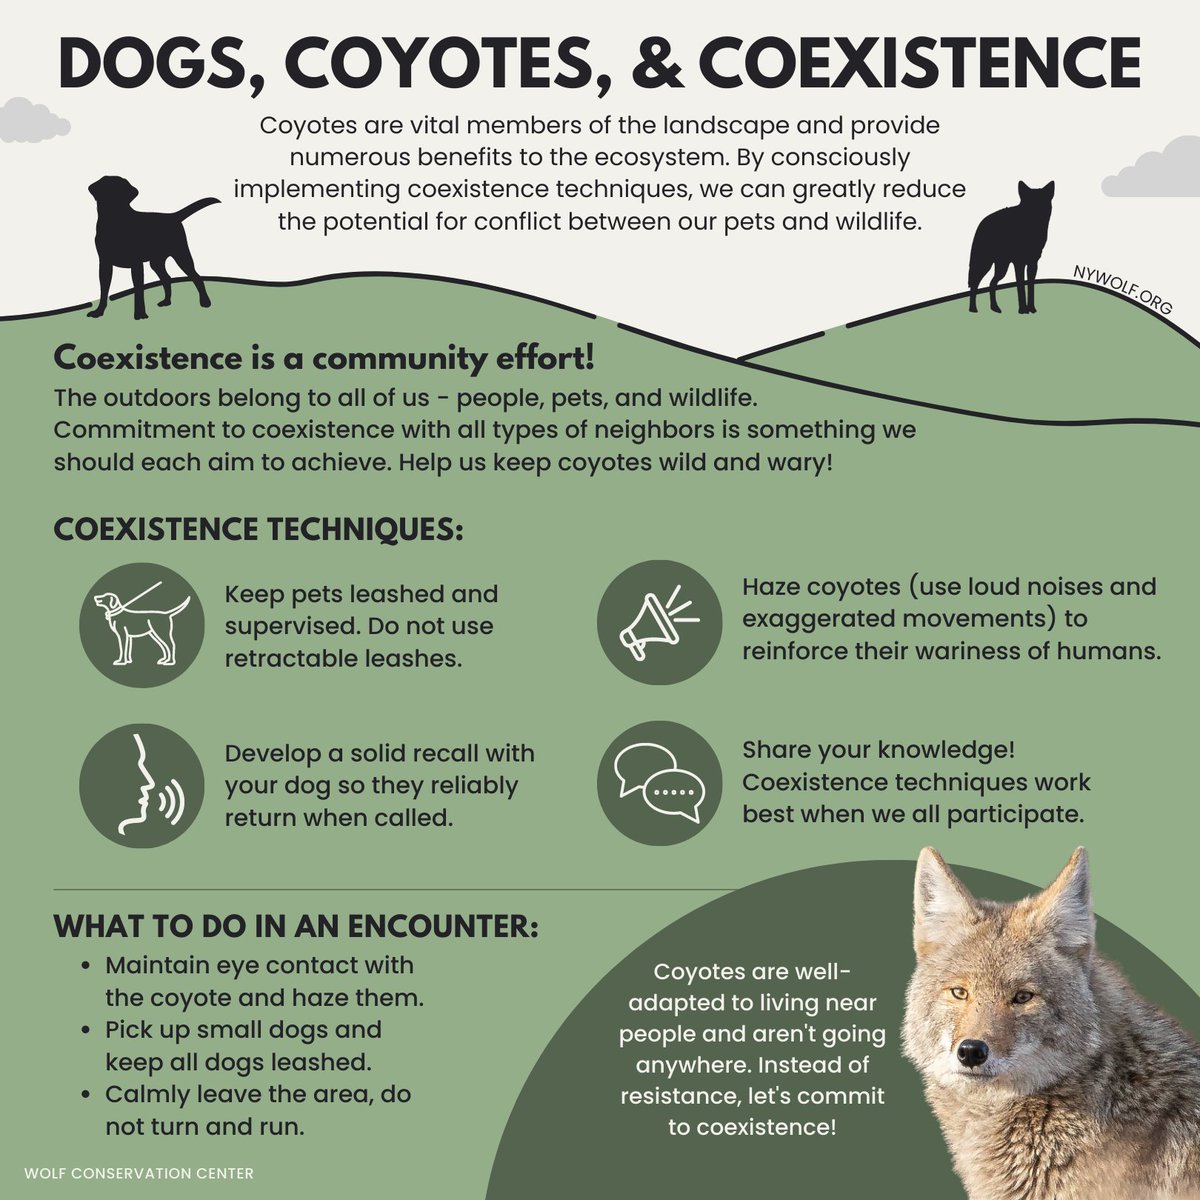 Coyotes are vital members of the landscape and provide numerous benefits to the ecosystem. By implementing coexistence techniques, we can greatly reduce the potential for conflict between our pets and wildlife.   

Learn more → nywolf.org/programs-event…